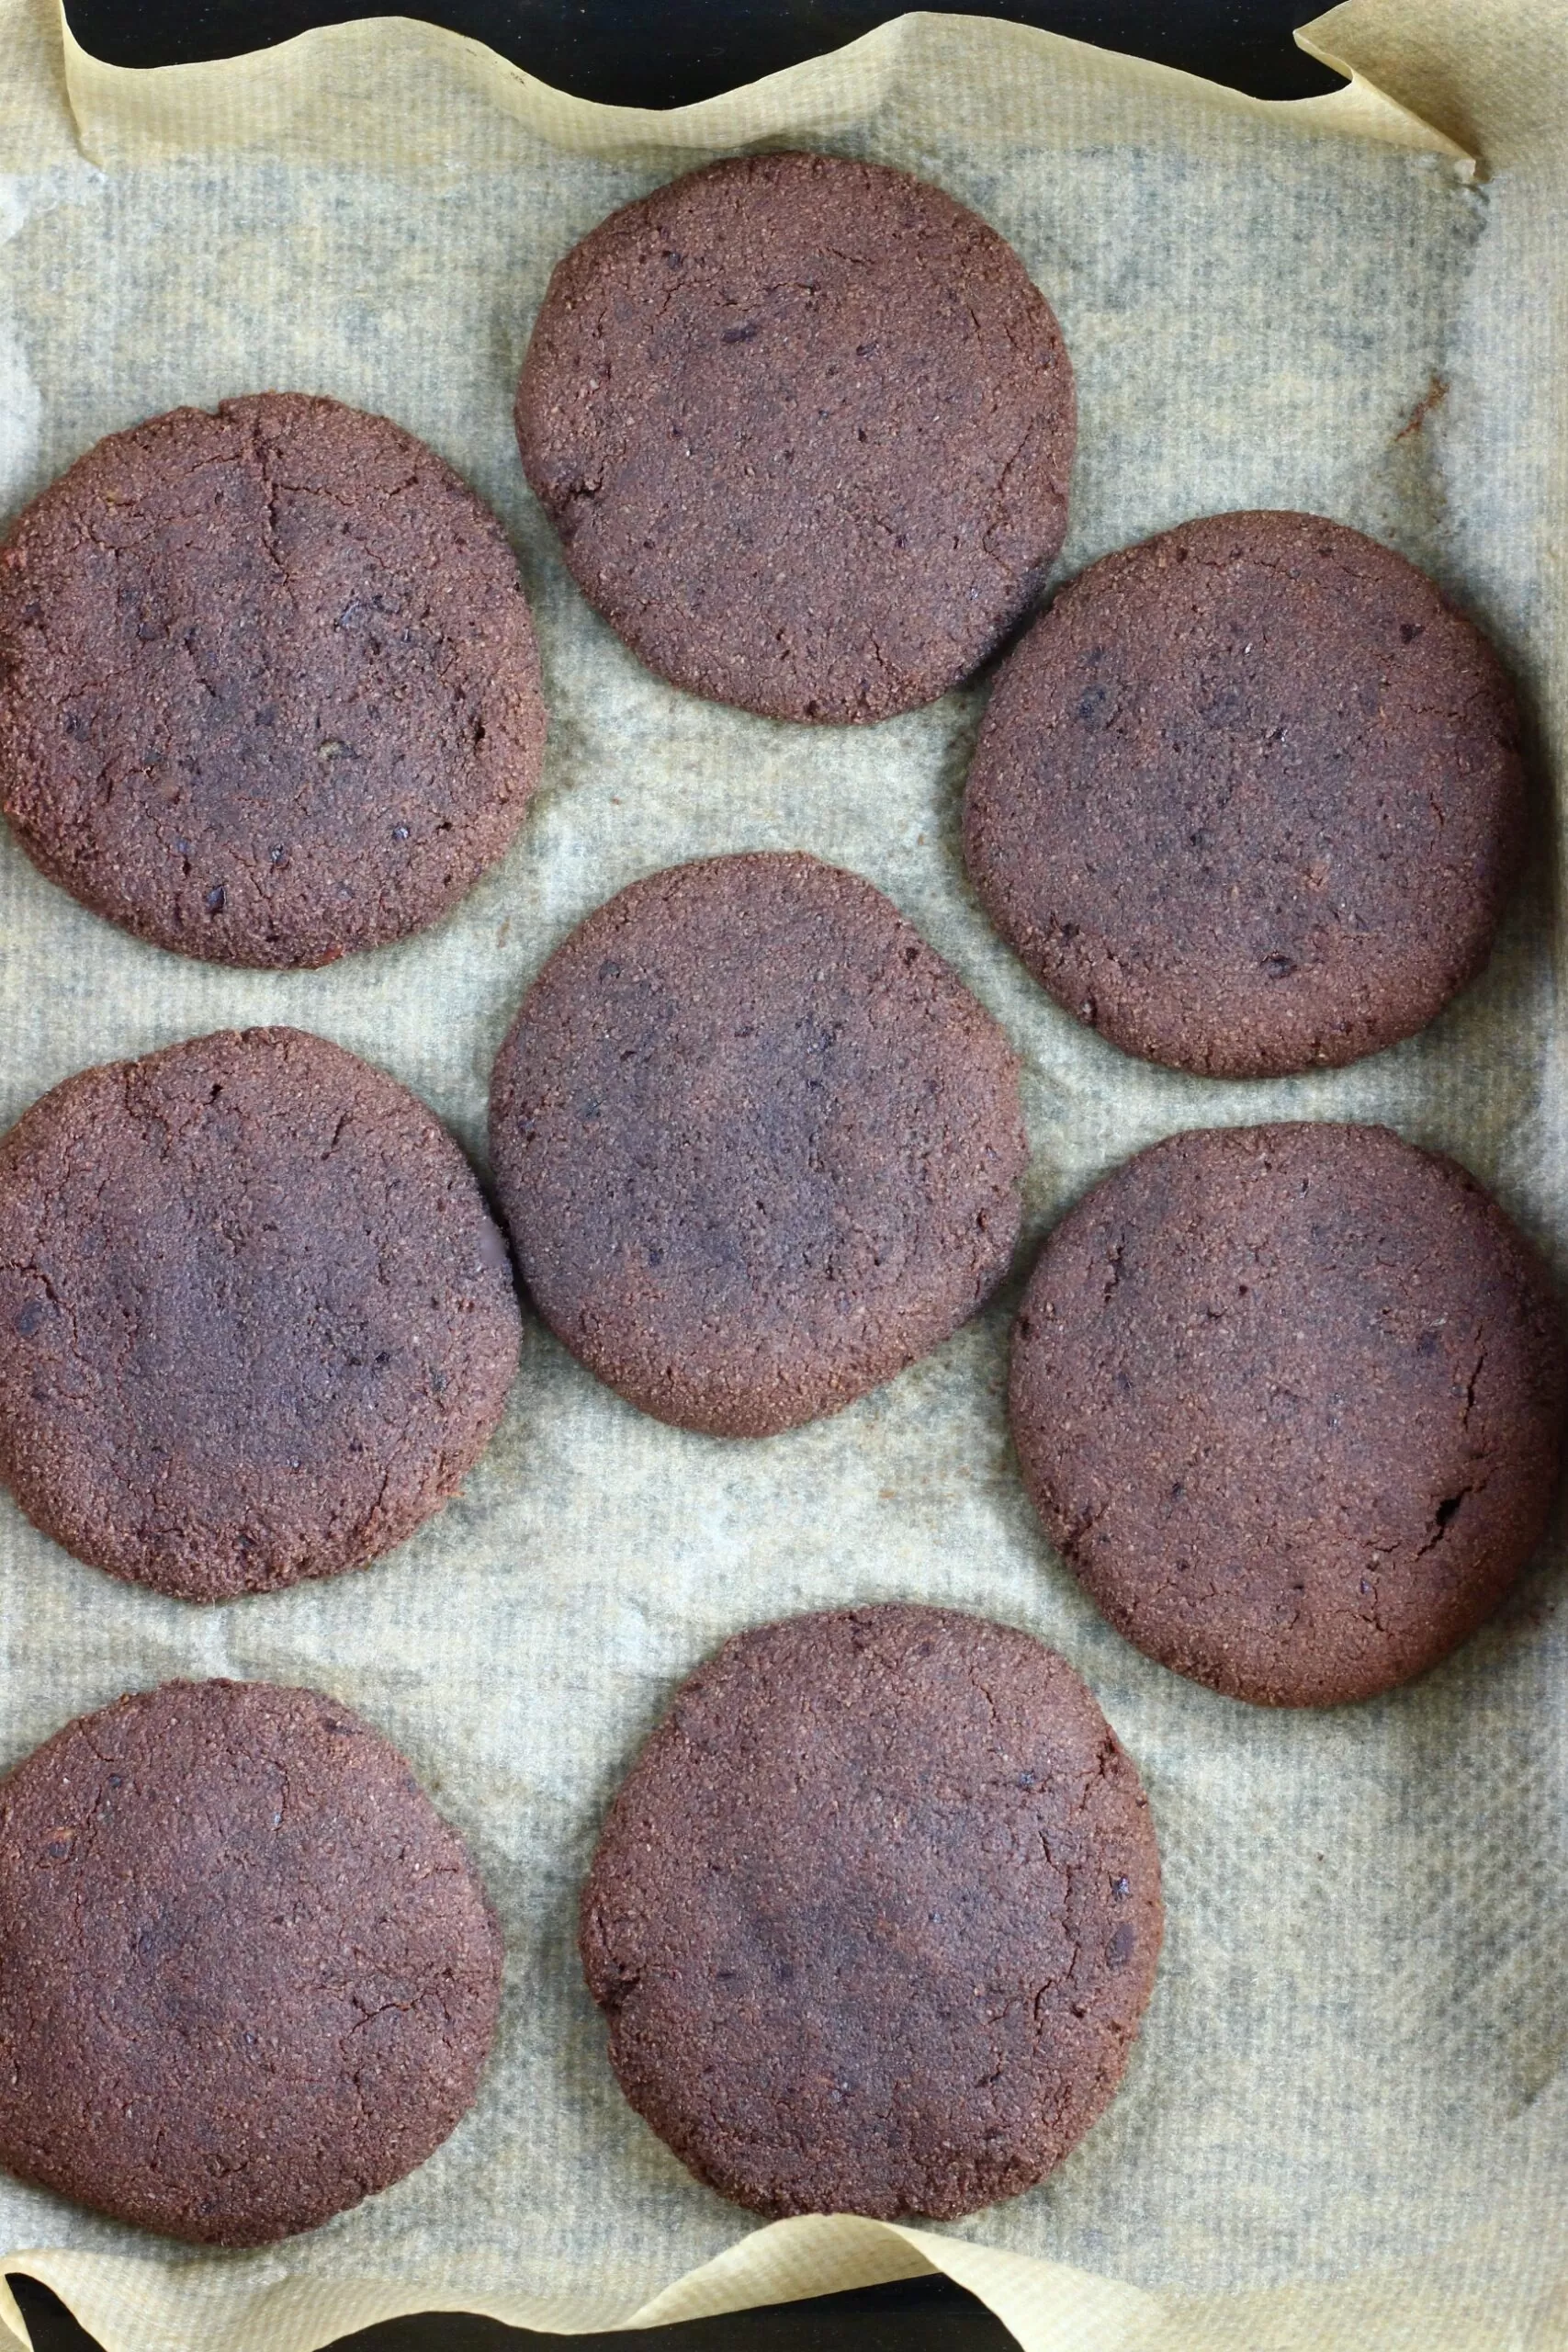 Eight gluten-free vegan chocolate brownie cookies on a baking tray lined with baking paper